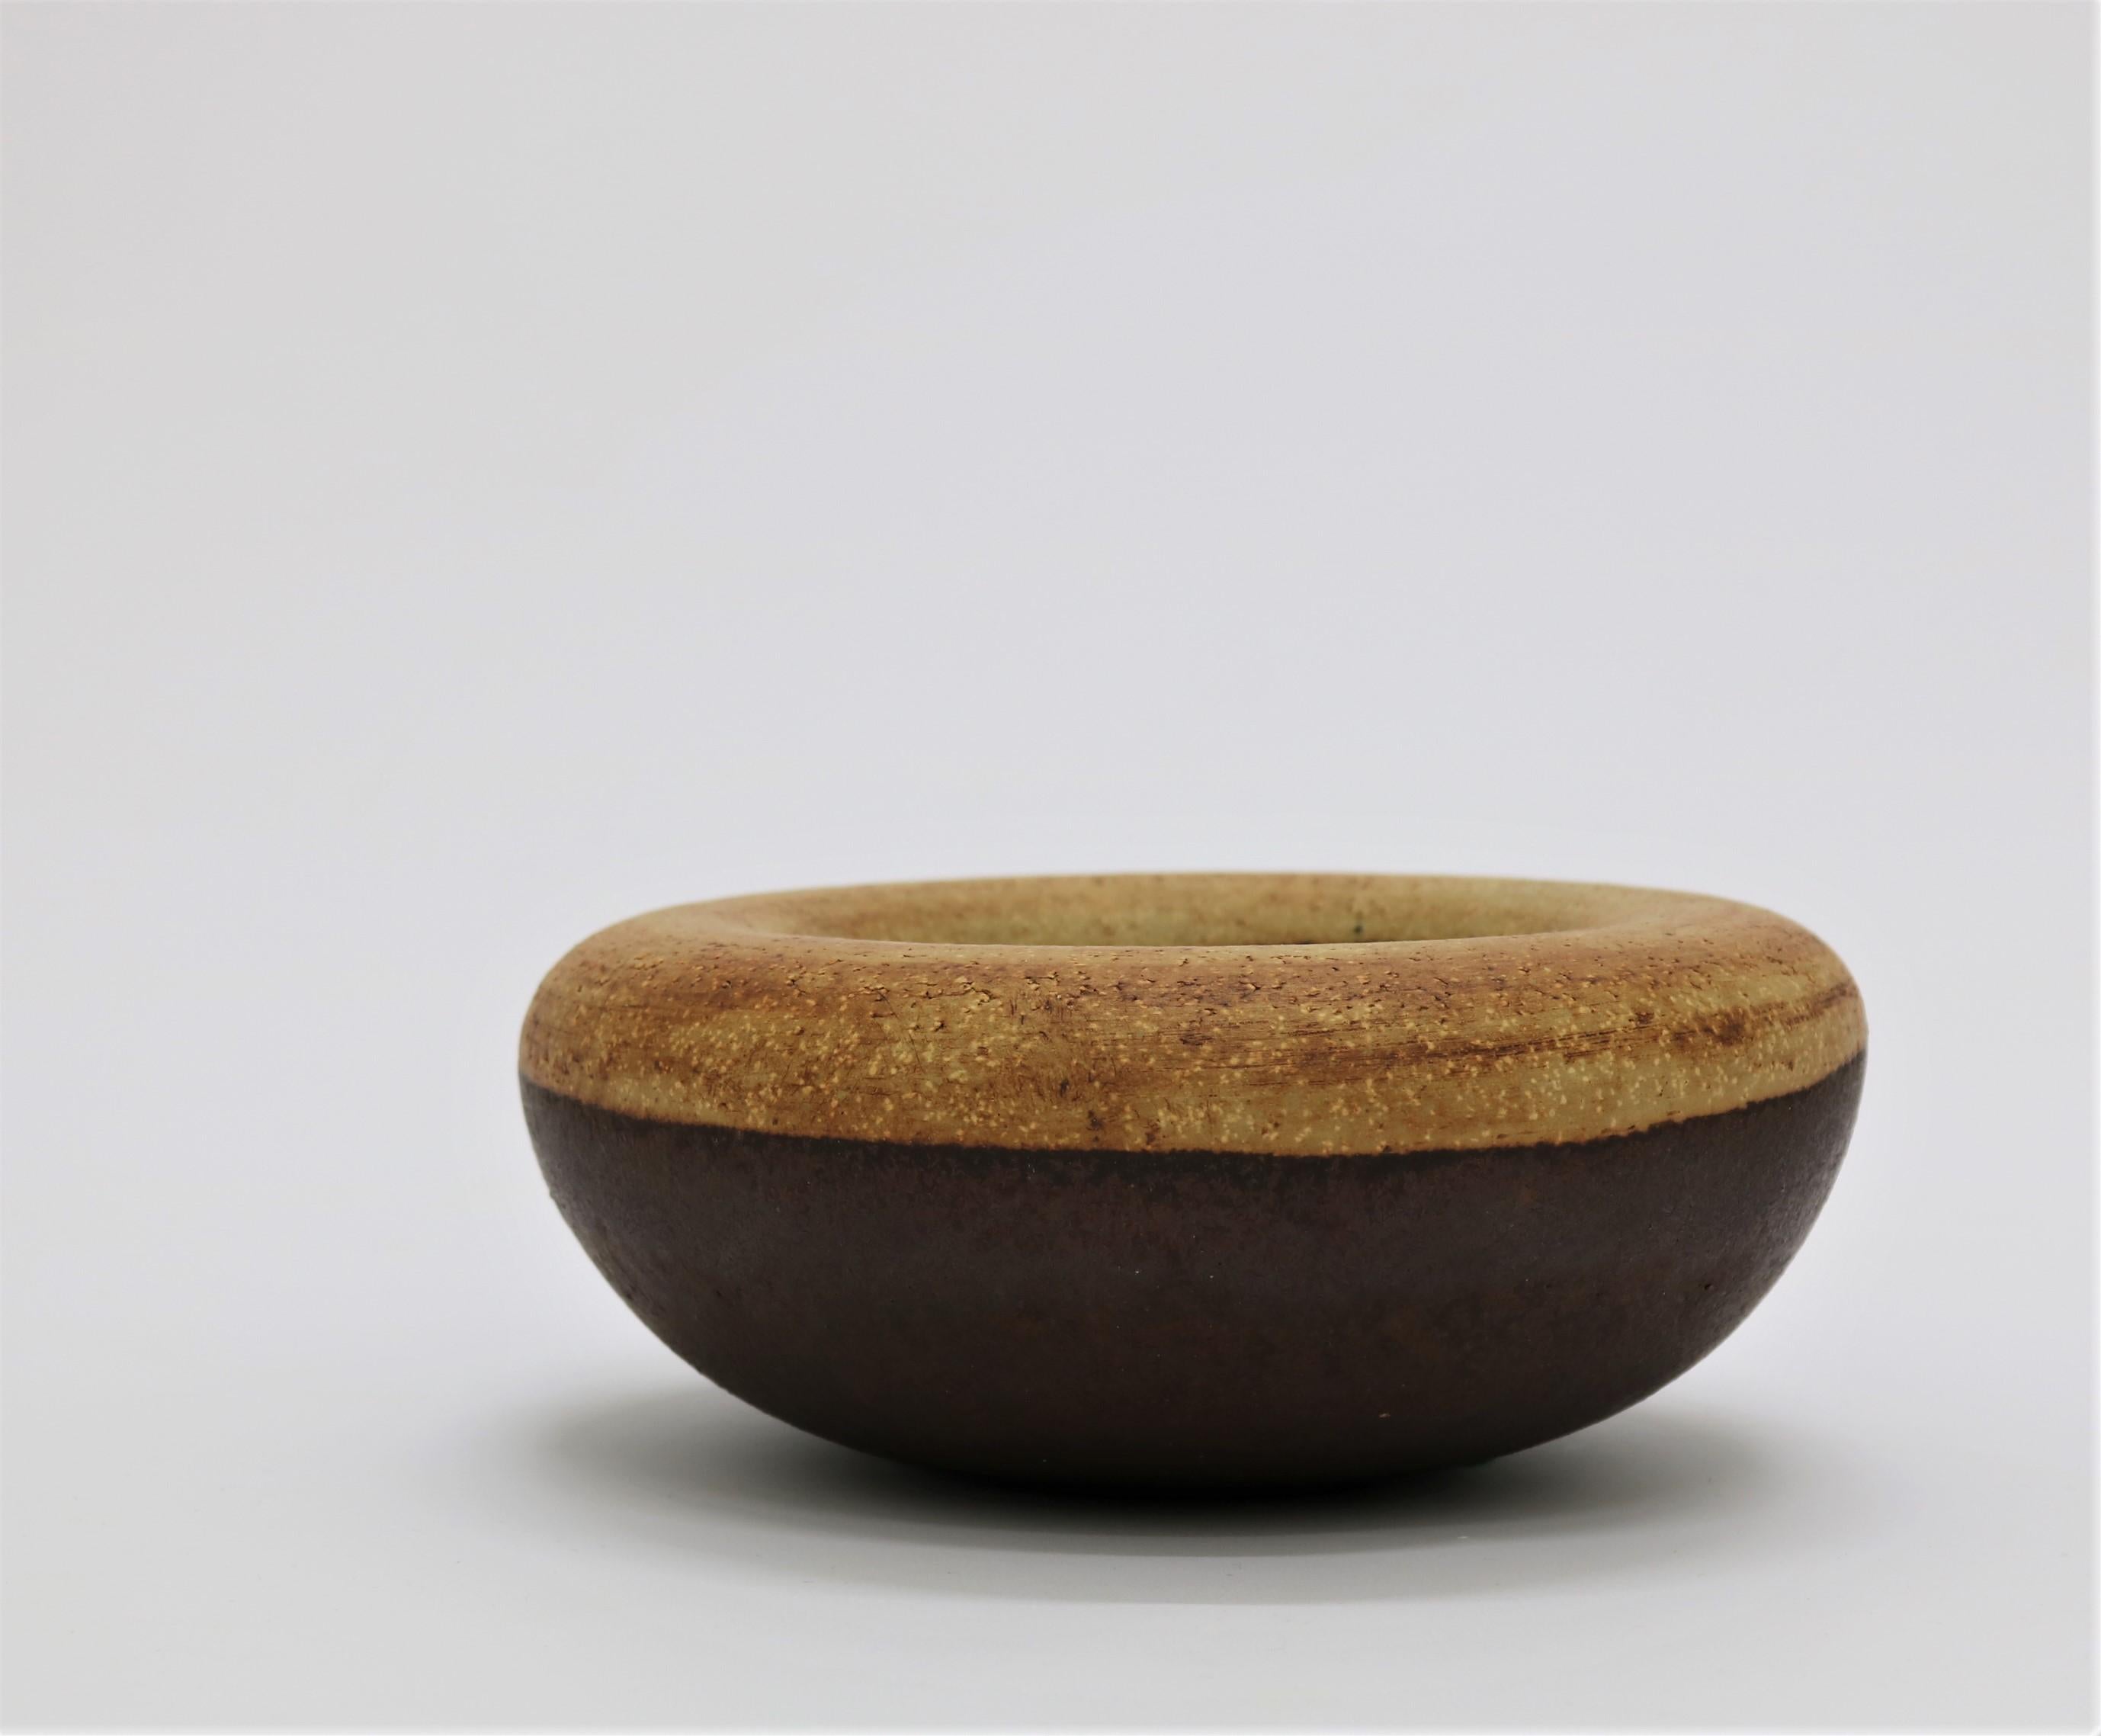 Scandinavian Modern Large Unique Alev Siesbye Stoneware Bowl from the 1960s for Royal Copenhagen